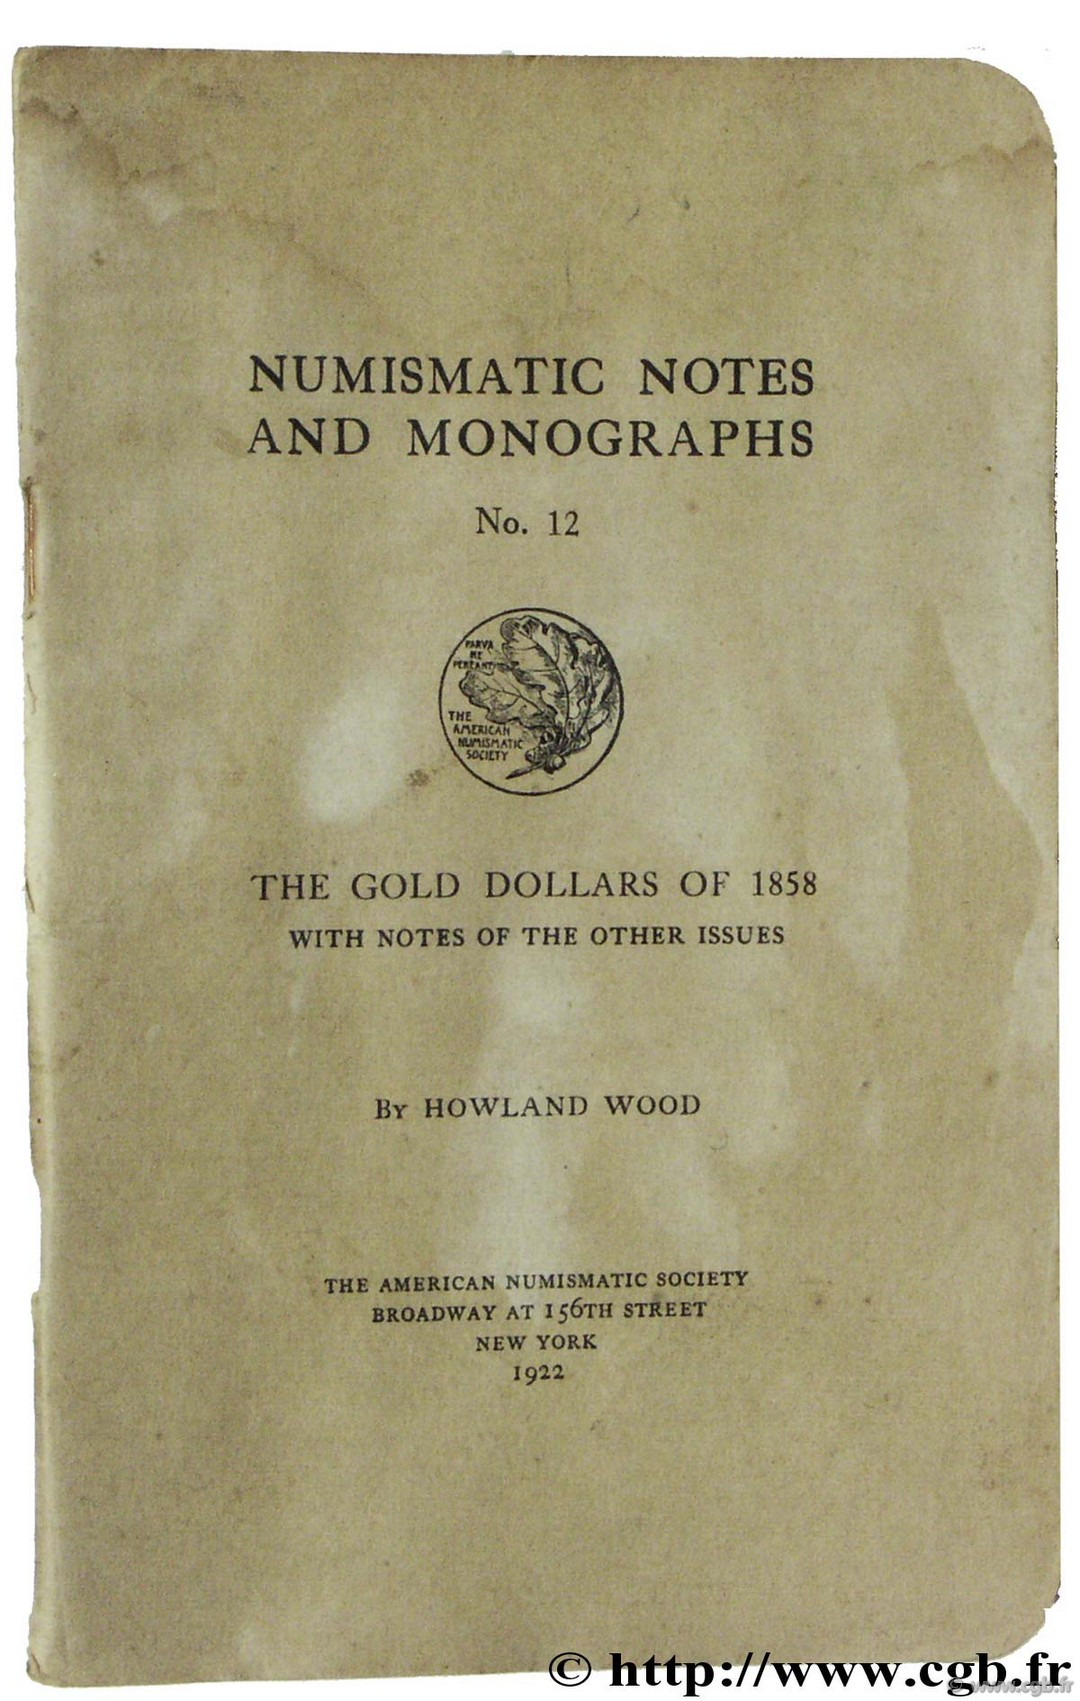 The Gold Dollars of 1858 with notes of the other issues, The American Numsimatic Society WOOD H.